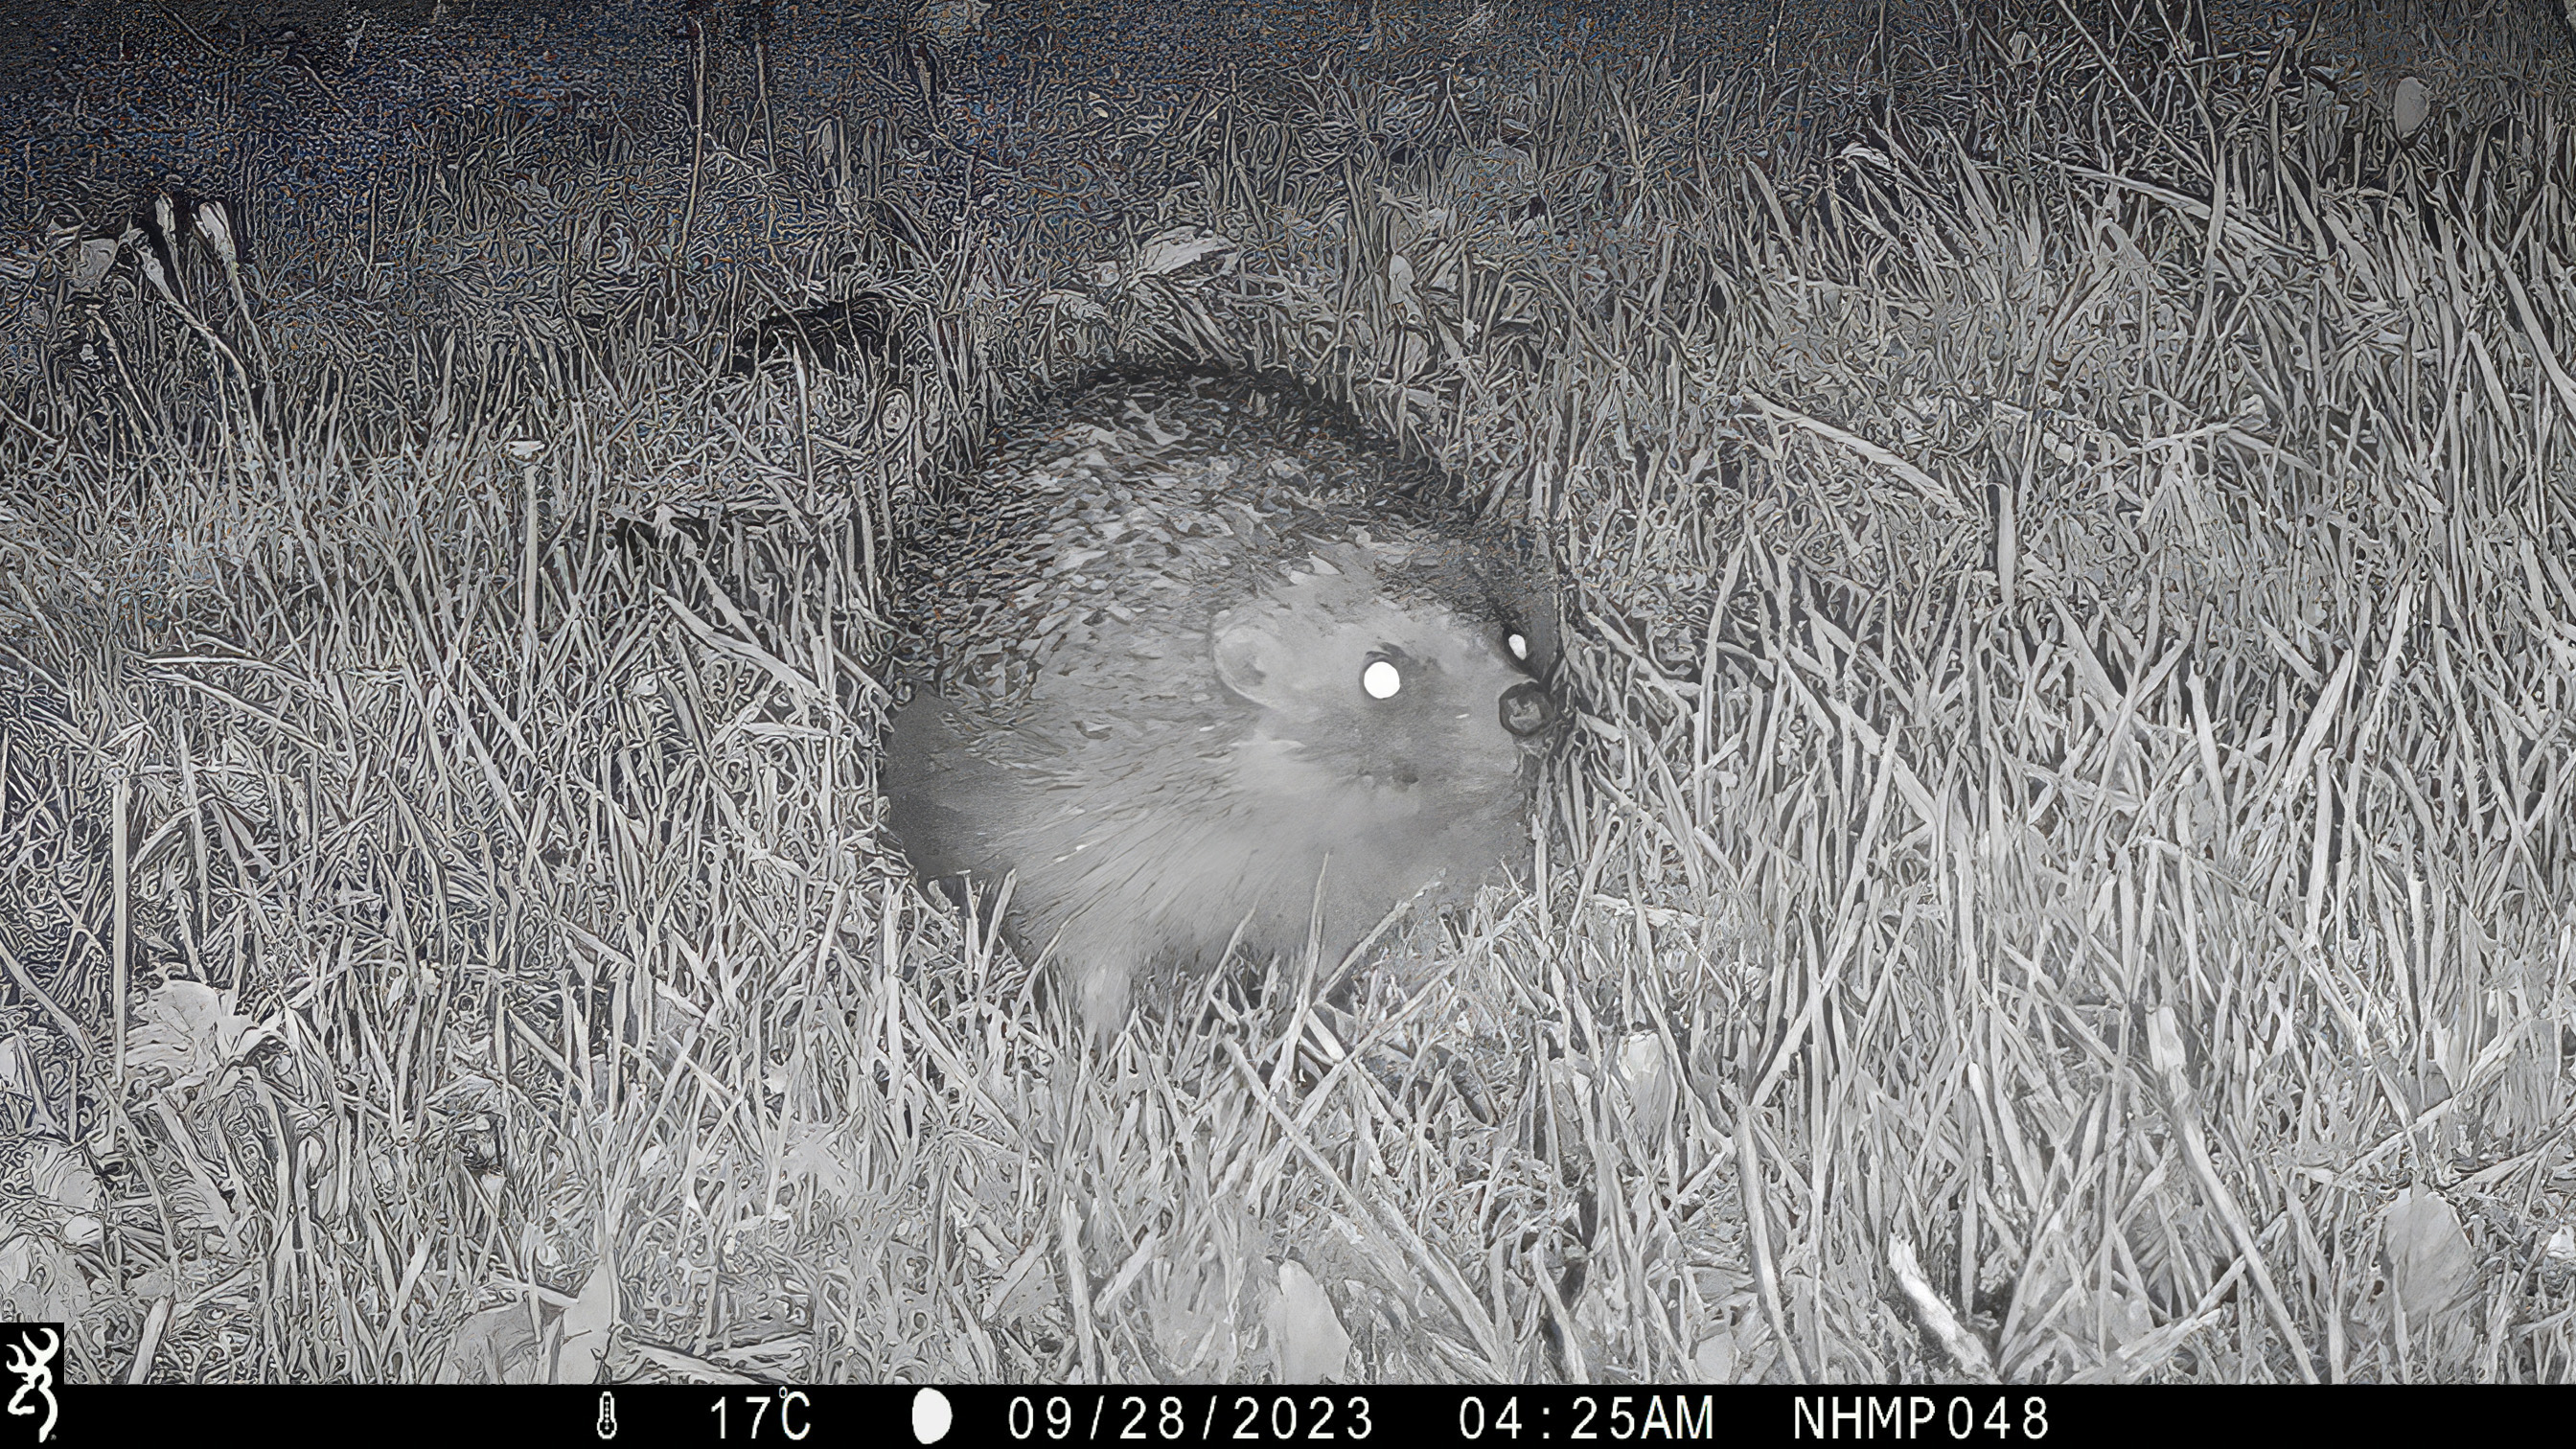 A black and white night time image of a hedgehog on grass captured by a trail camera